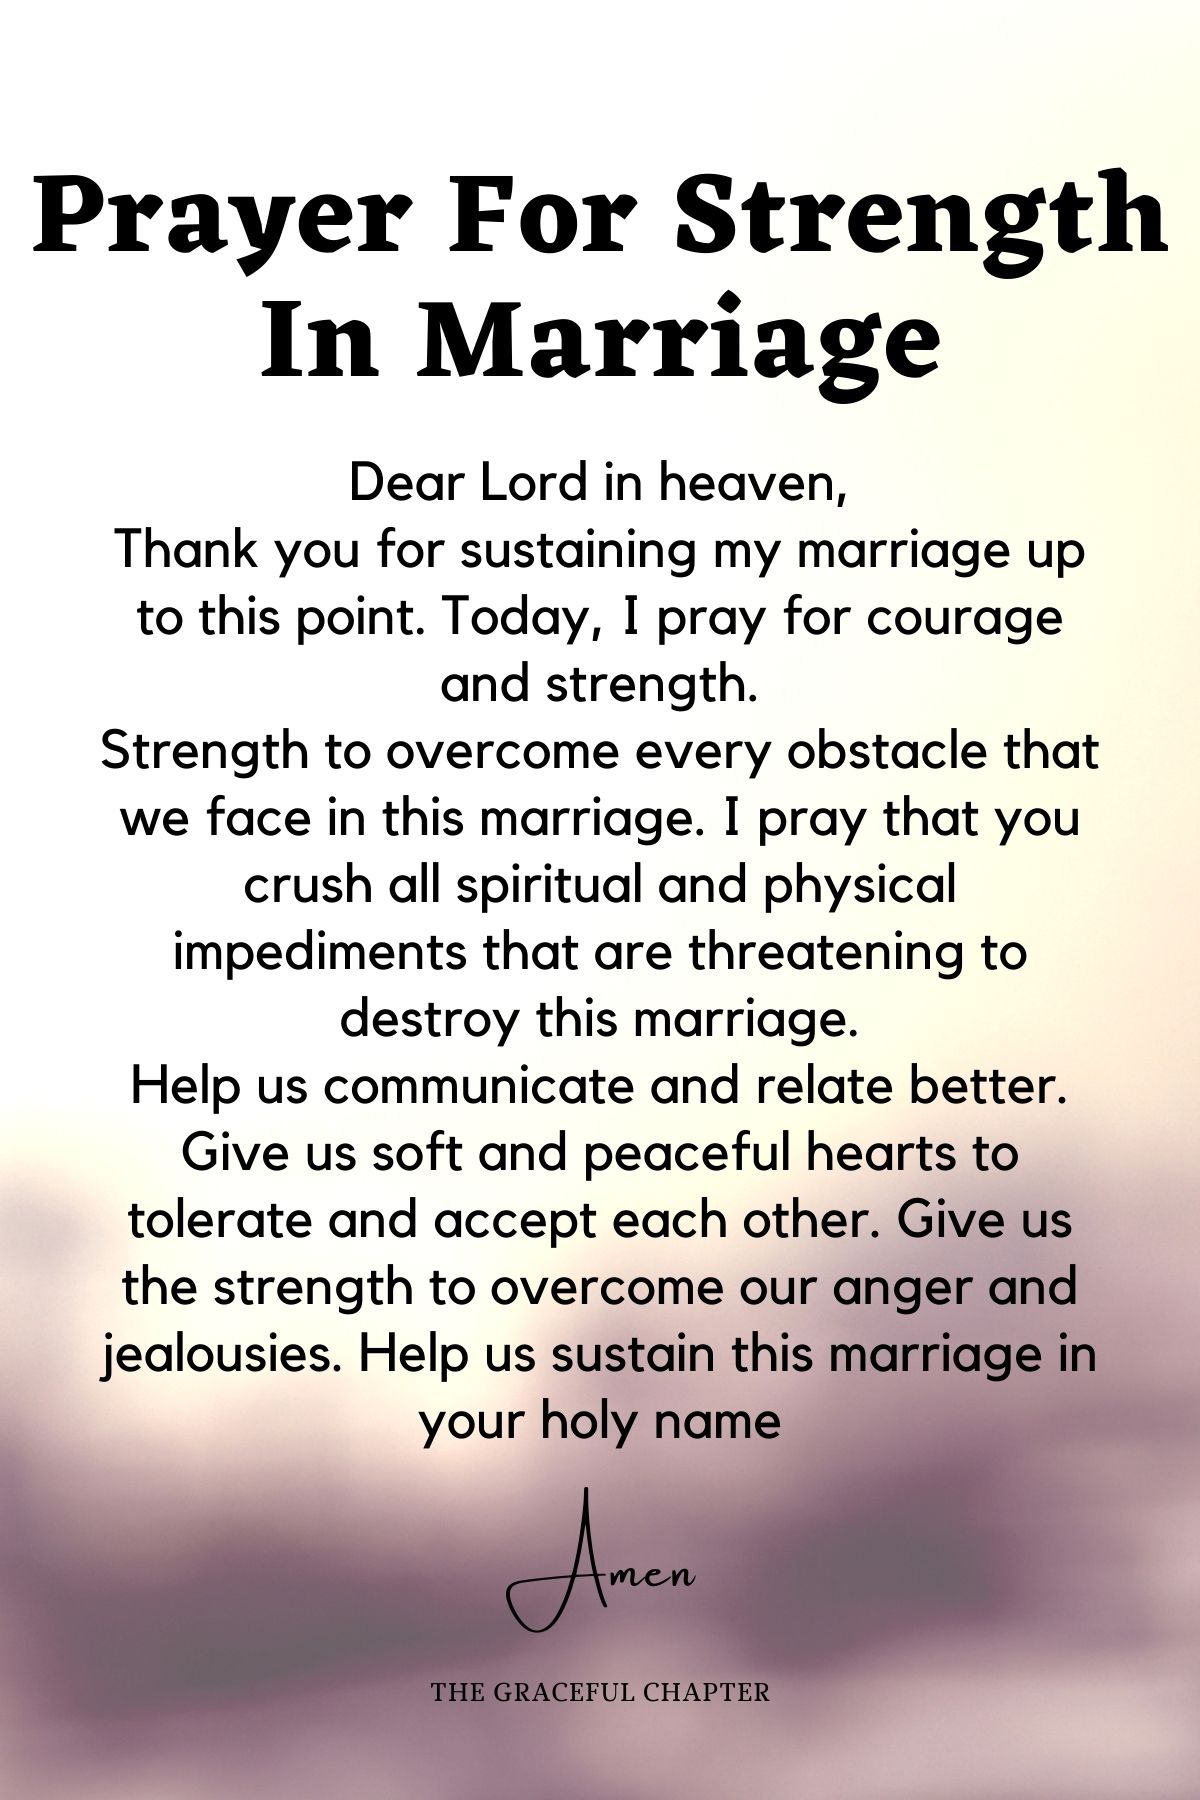 Prayer for strength in marriage